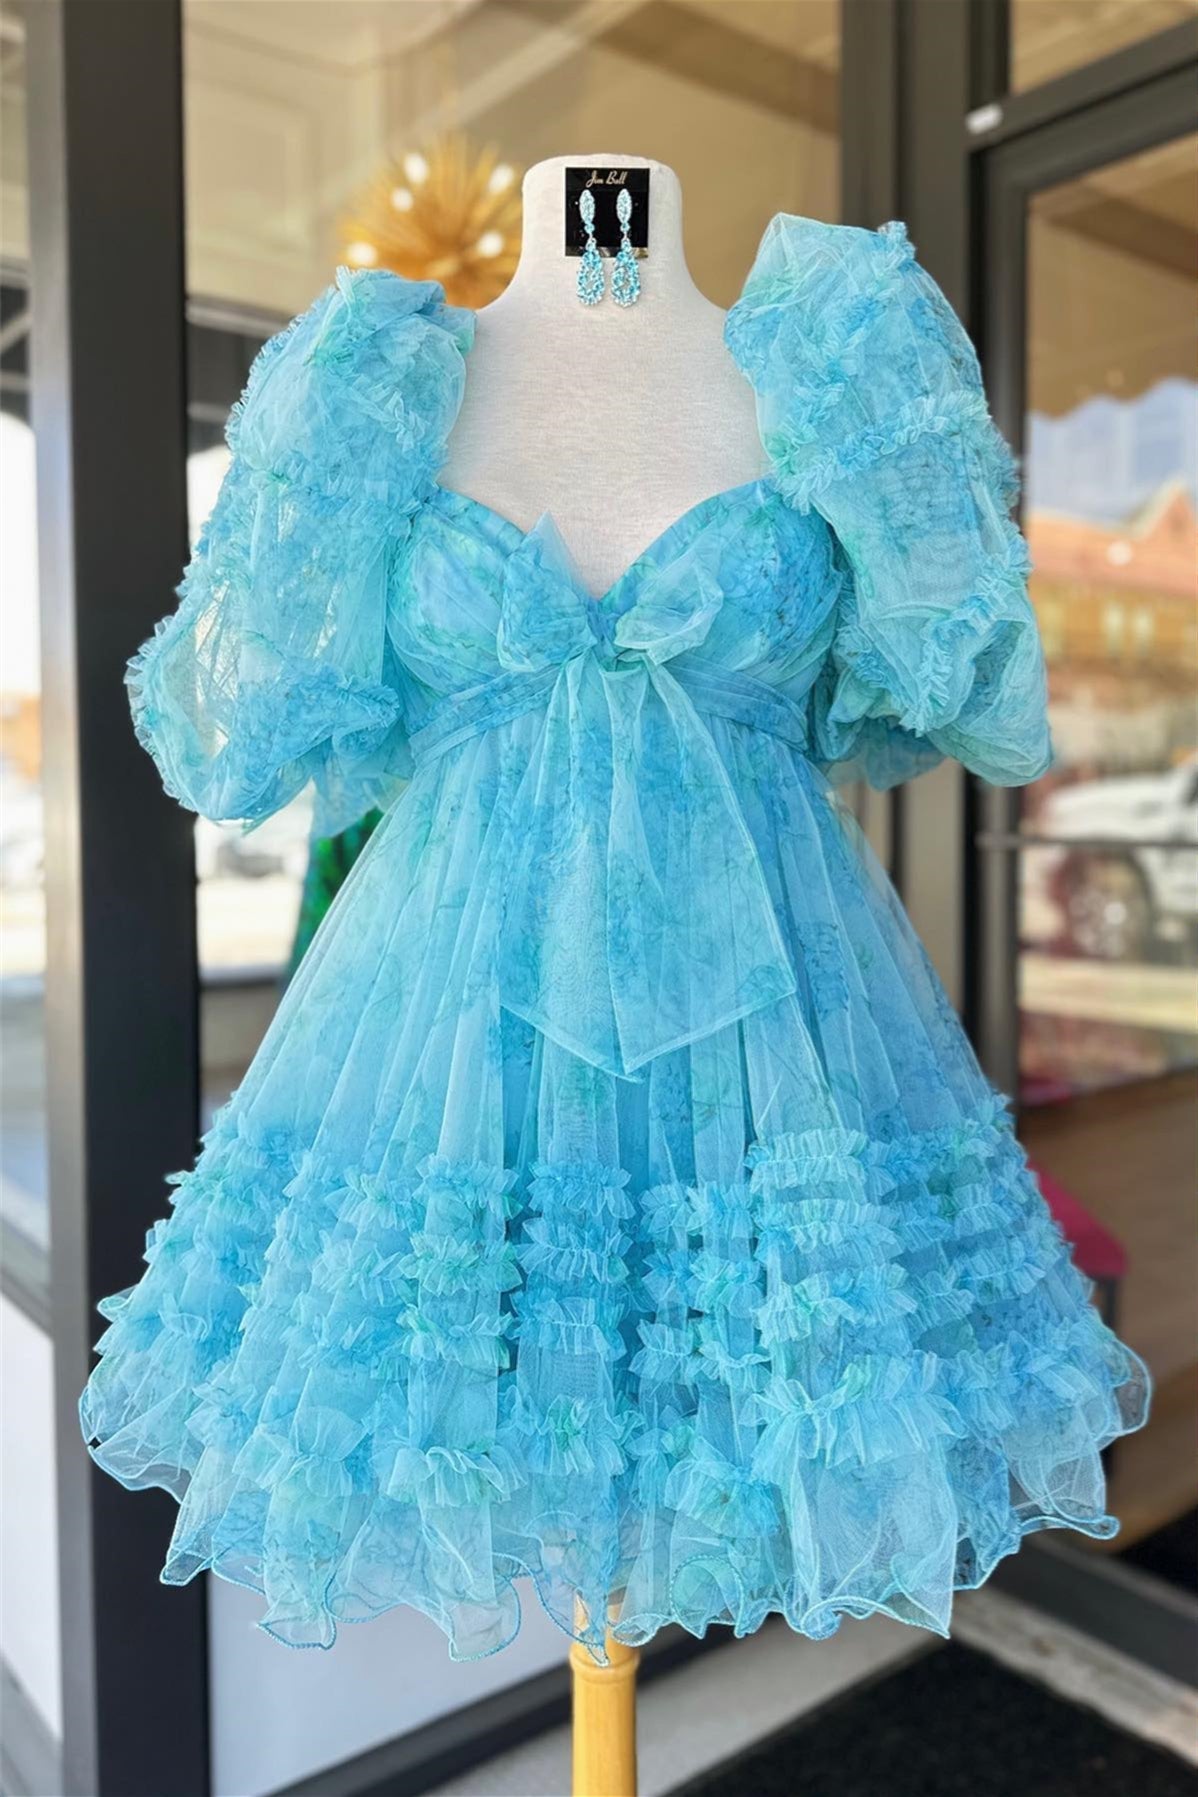 dressimeUnique Short Layered Tulle Sweetheart Neck Short Cocktail Dress, Homecoming Dresses 